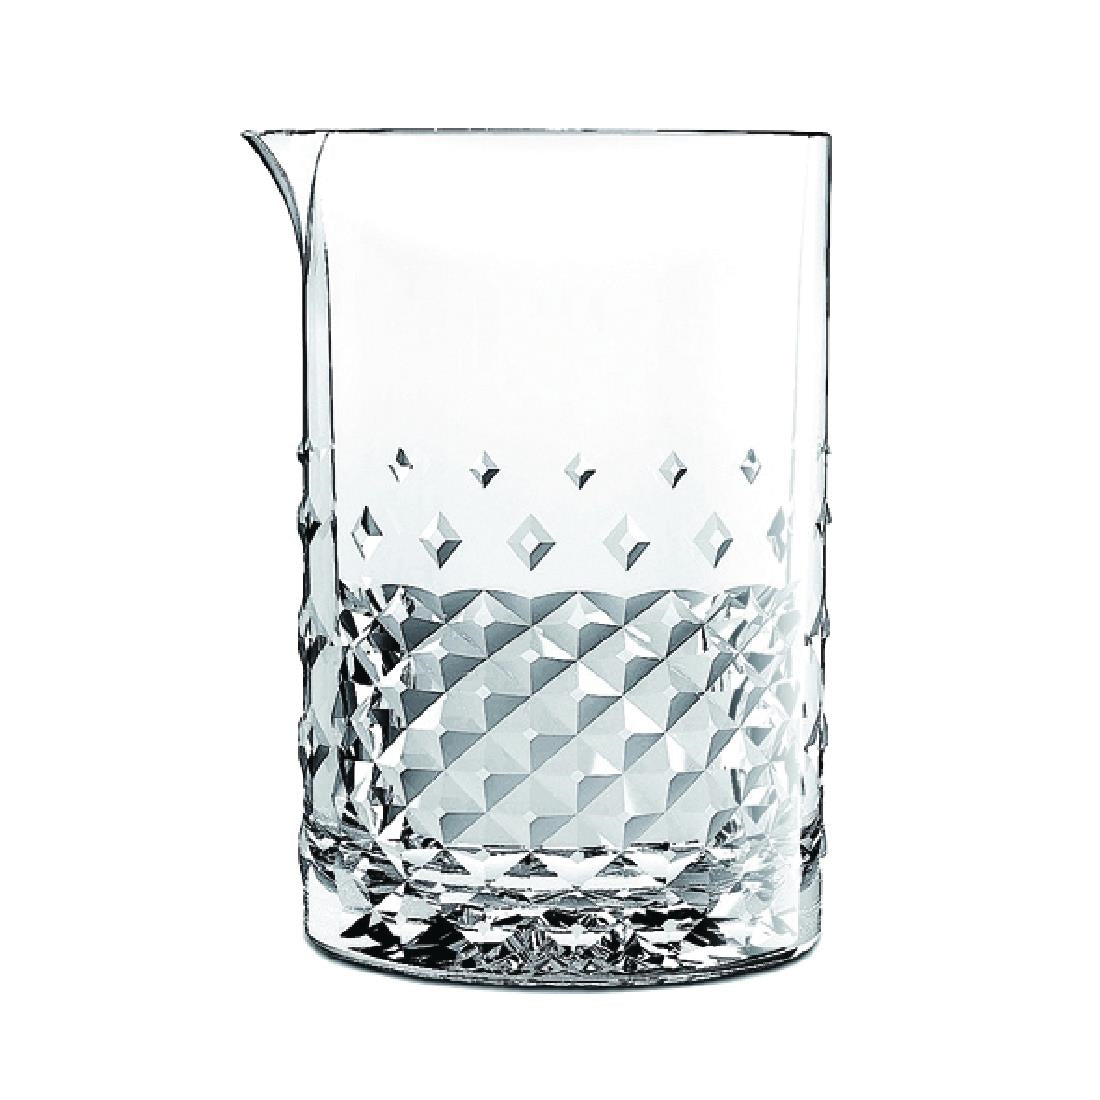 FU400 Onis Carats Stirring Glasses with Lip 750ml (Pack of 6)